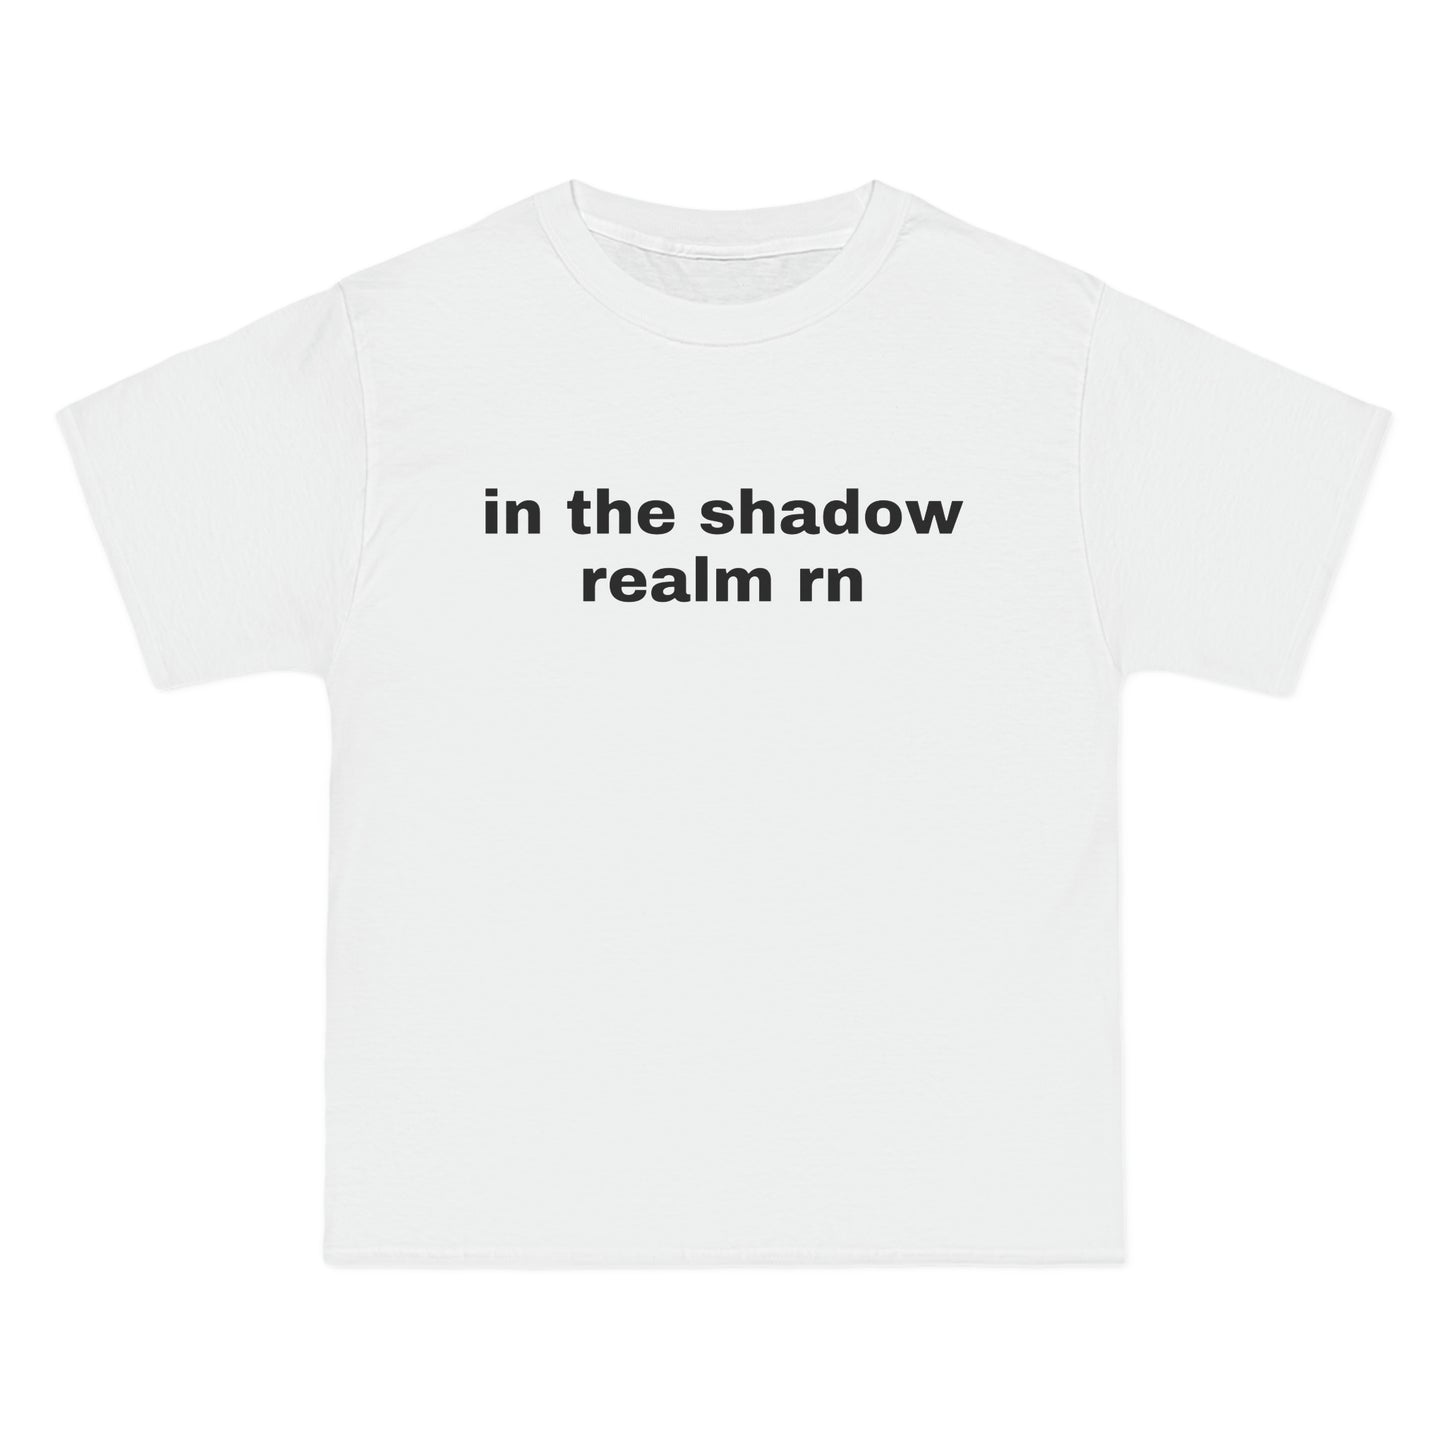 in the shadow realm rn Tee